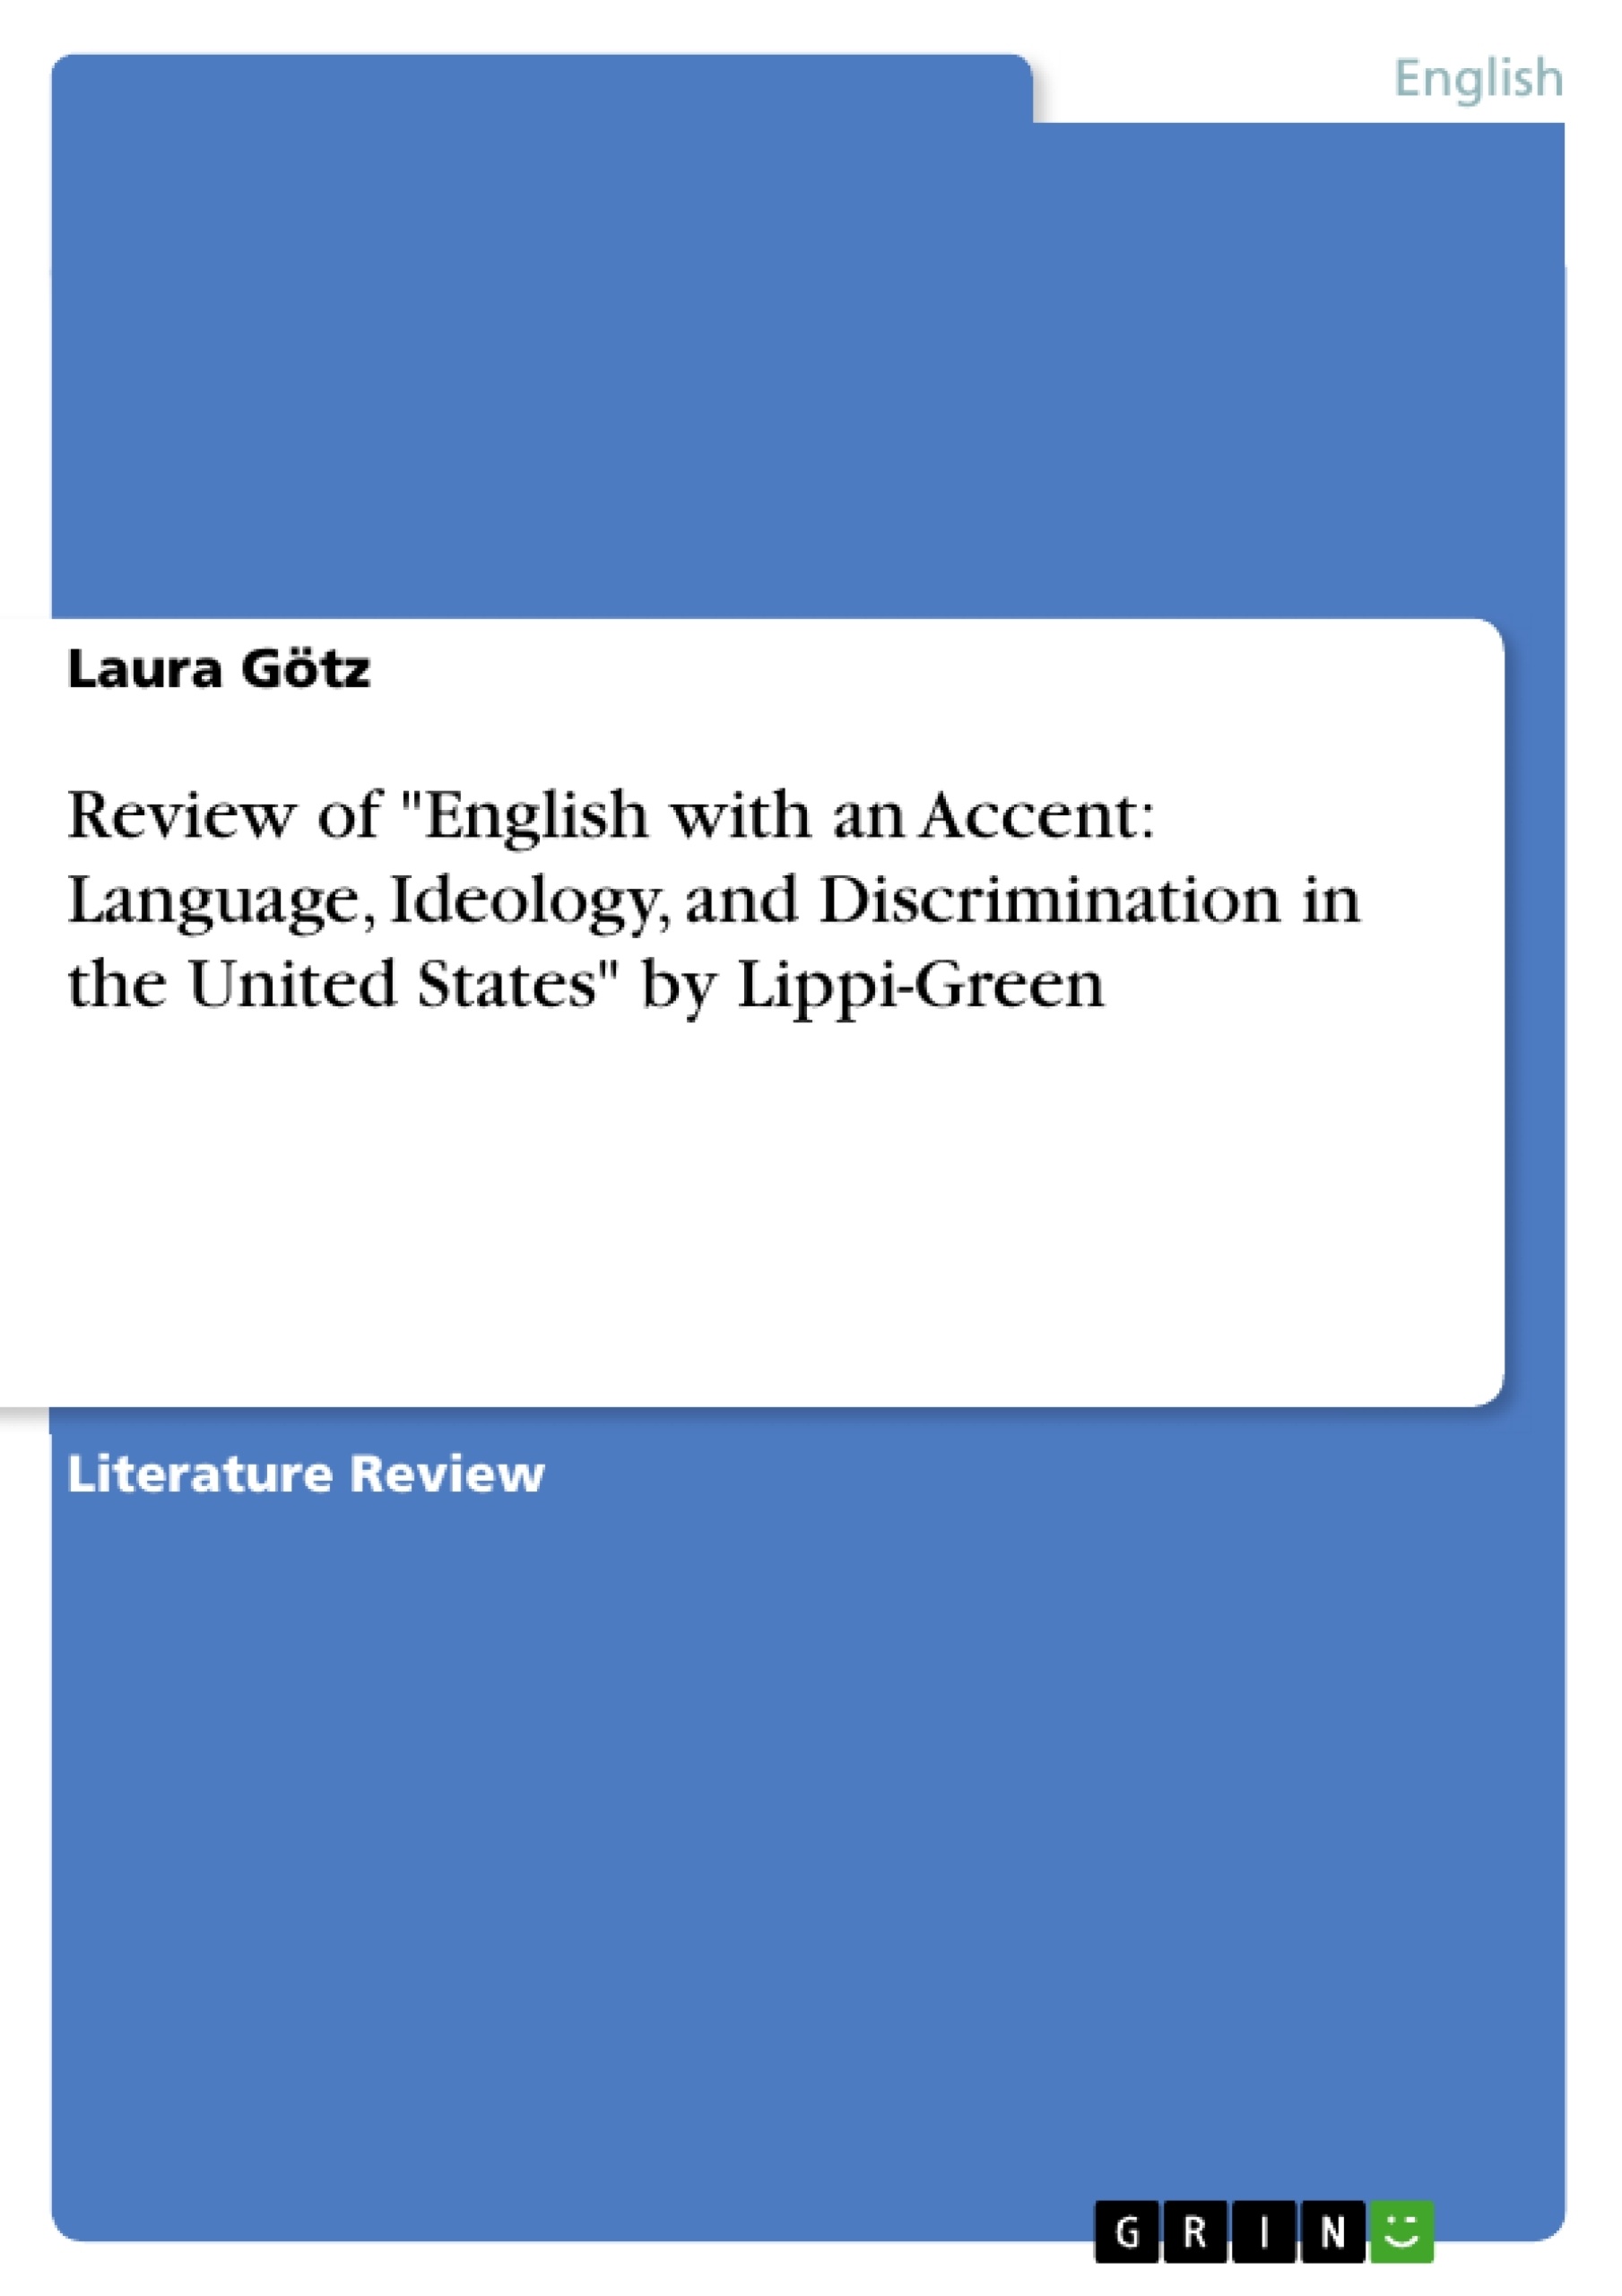 Title: Review of "English with an Accent: Language, Ideology, and Discrimination in the United States" by Lippi-Green